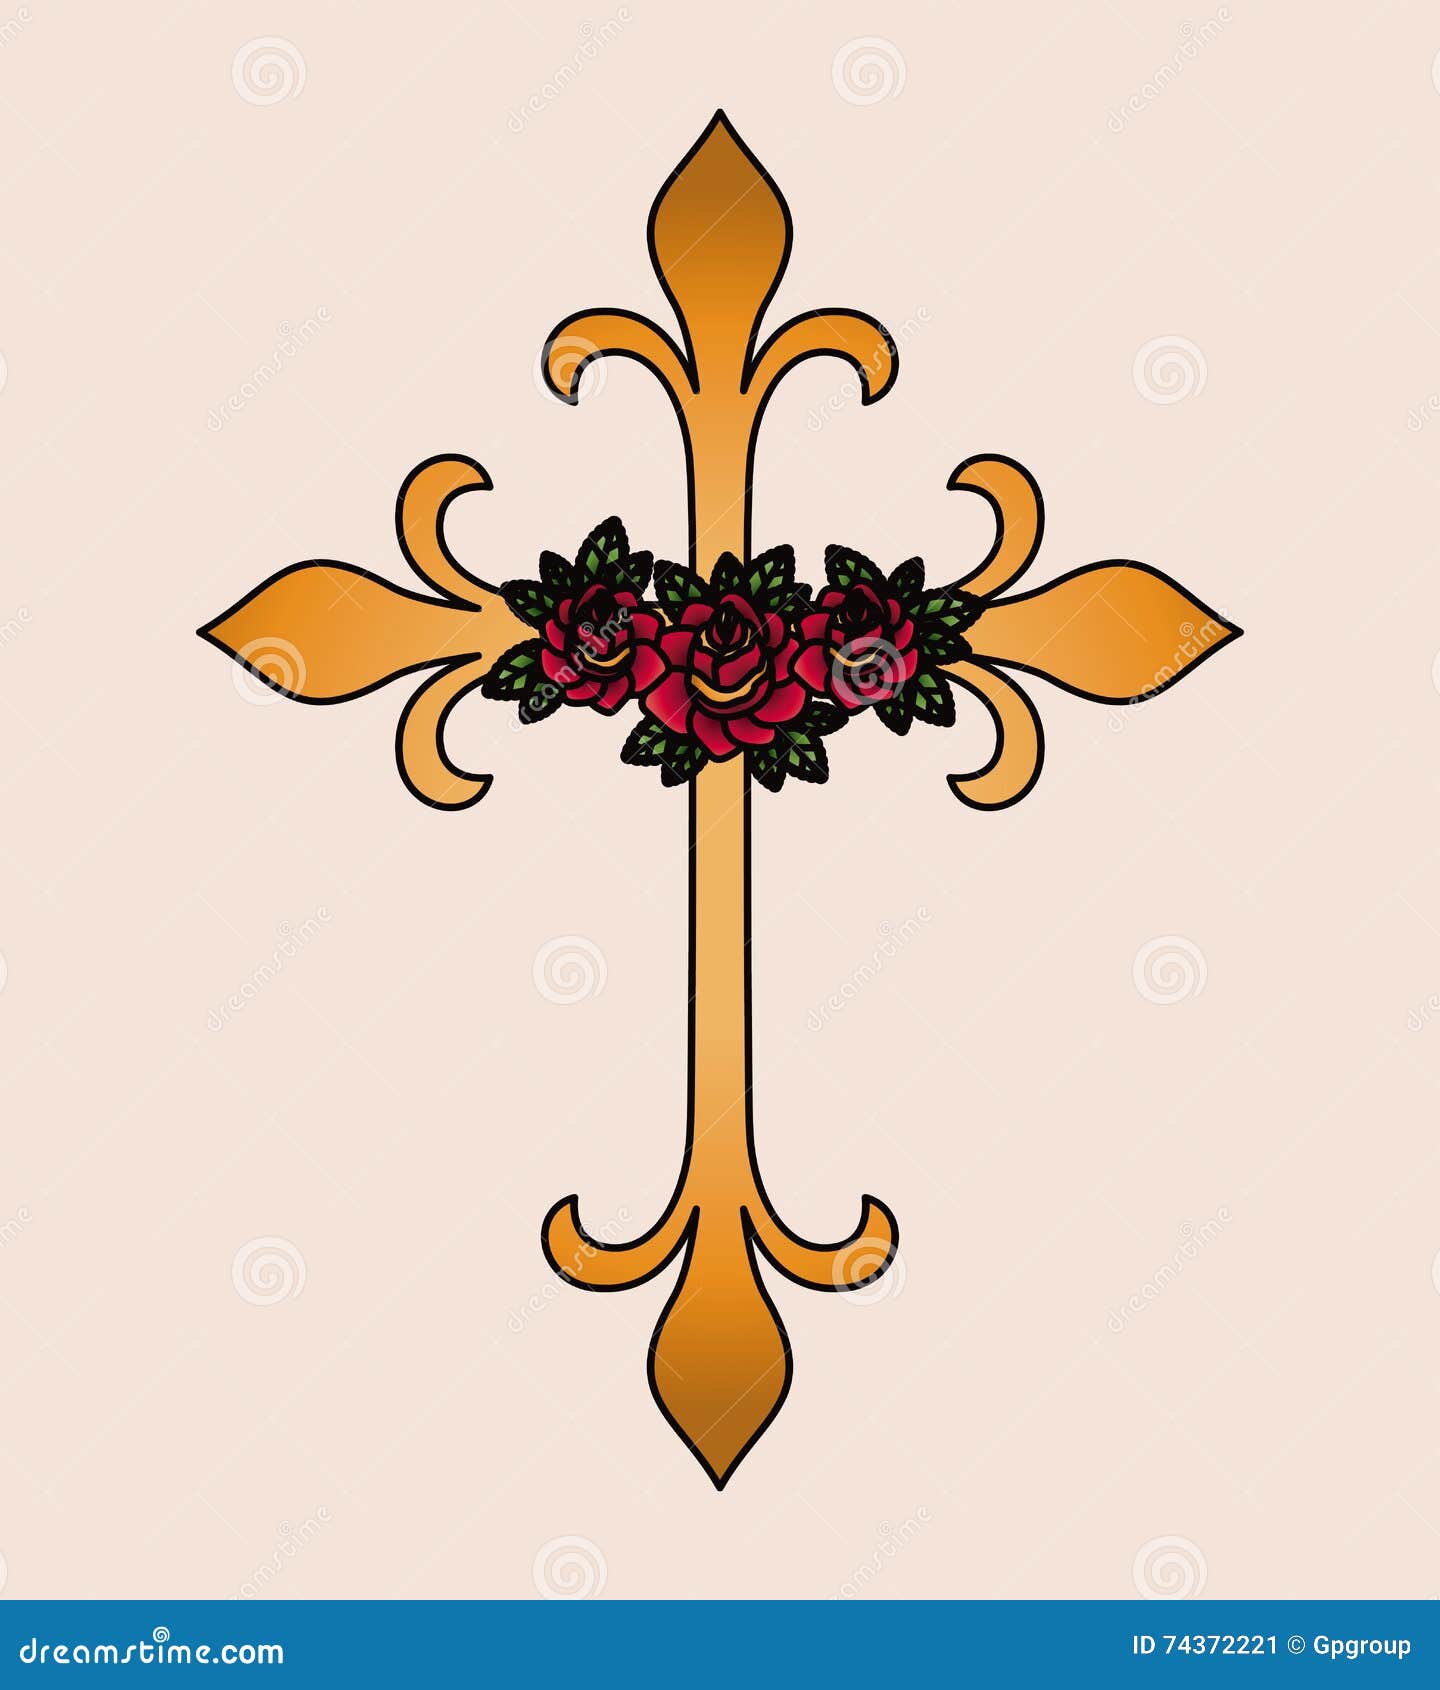 Top more than 81 cross with flowers tattoo meaning best  thtantai2